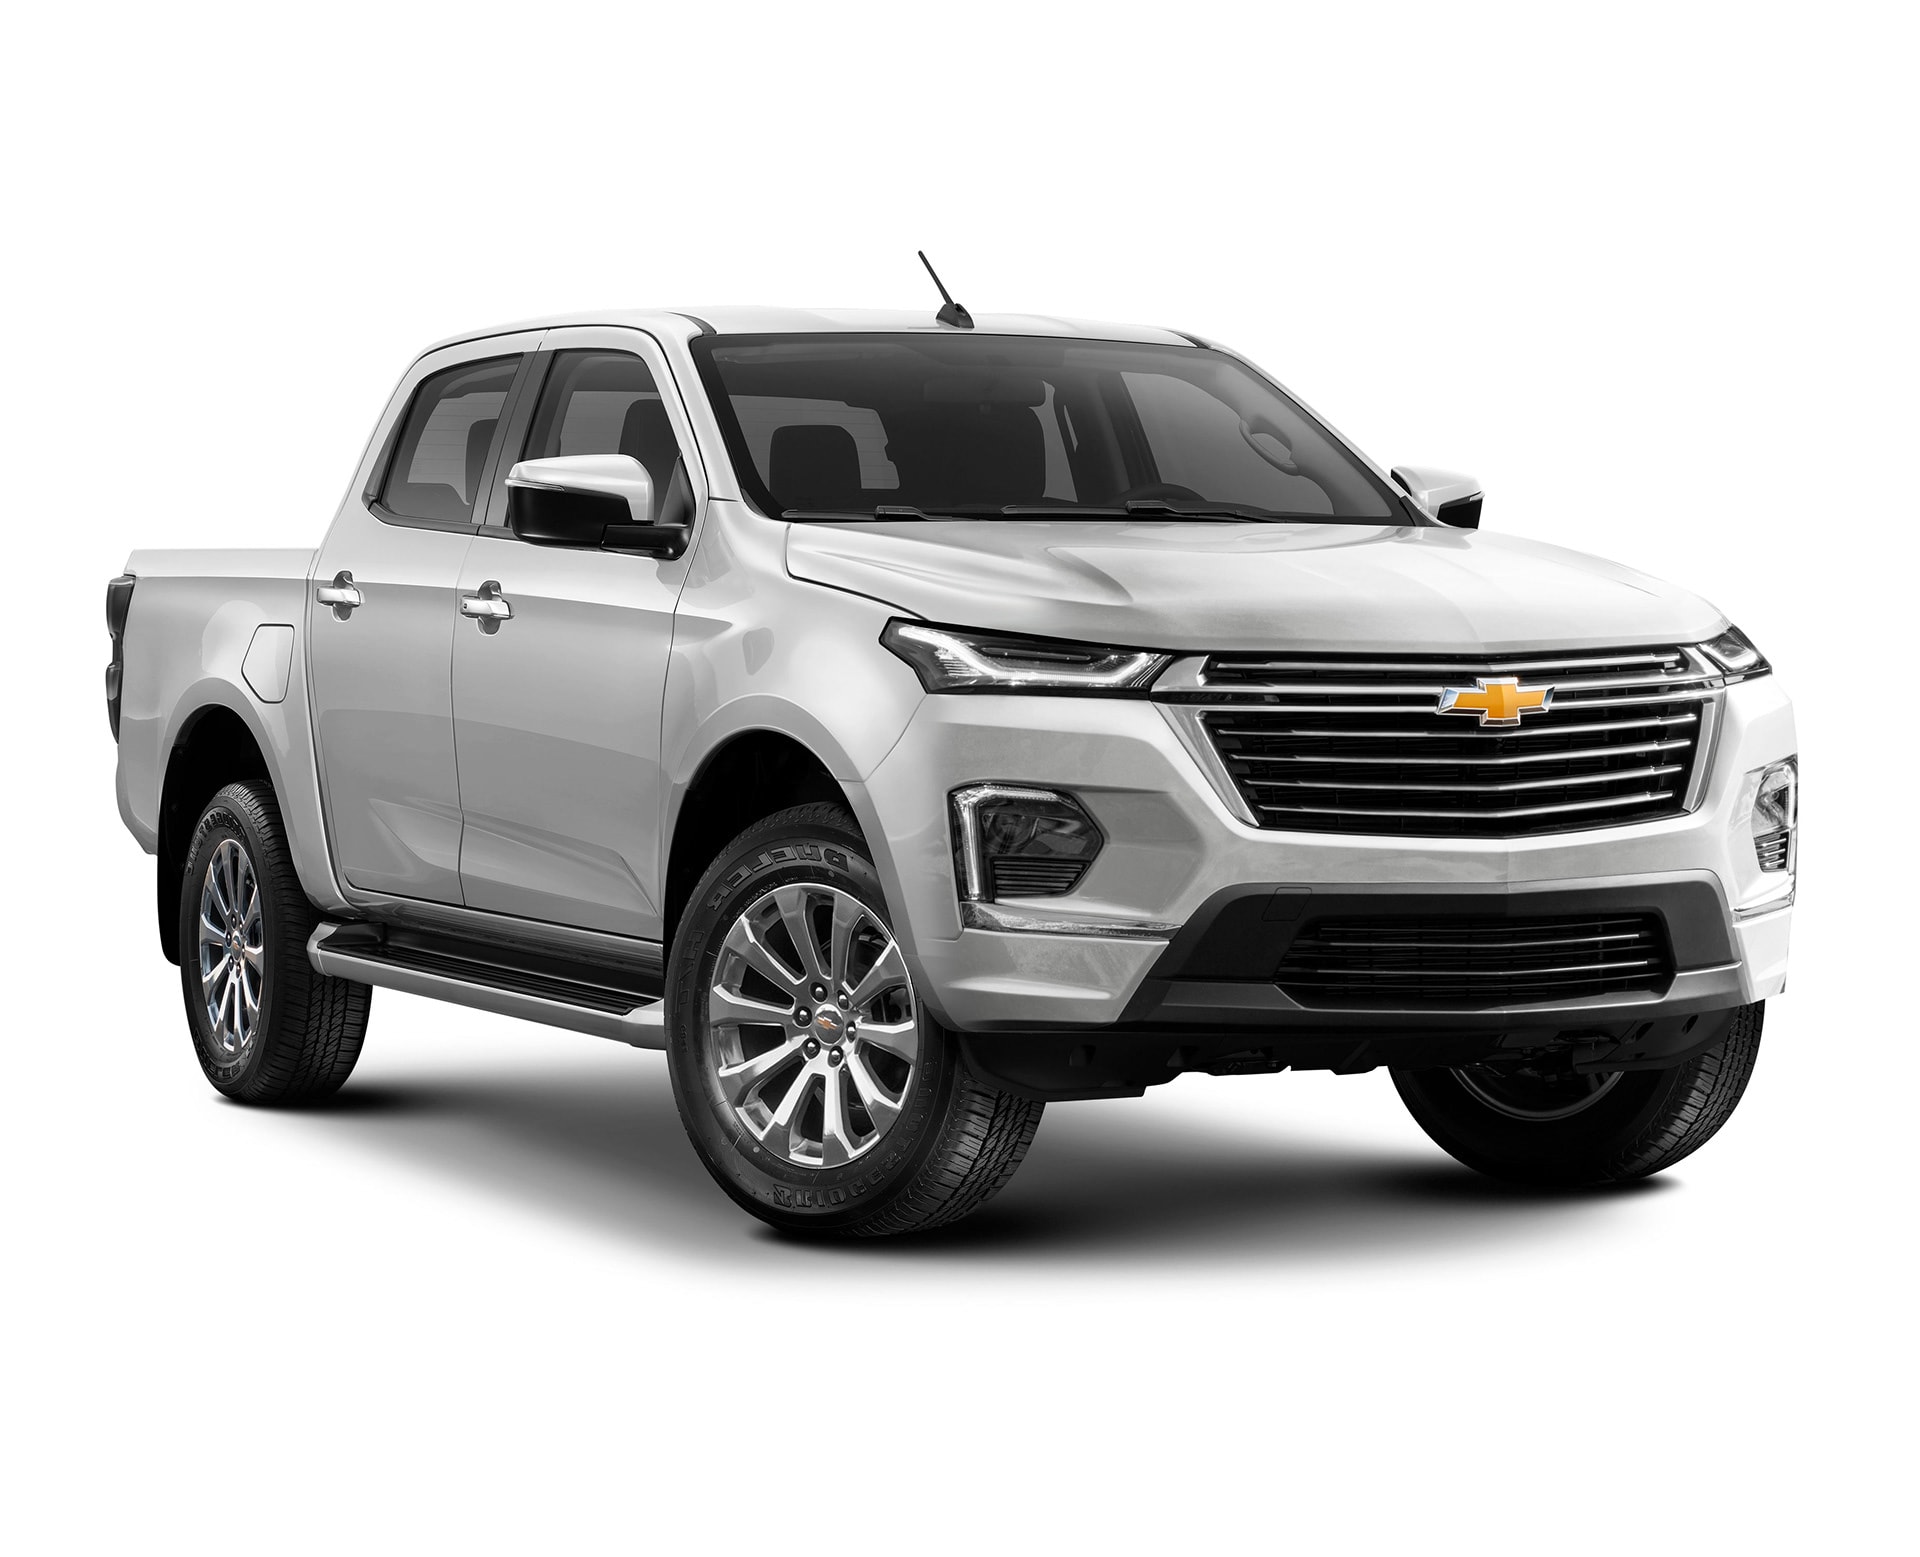 2023 Chevrolet Colorado Gets Imagined as All-New Pickup - autoevolution